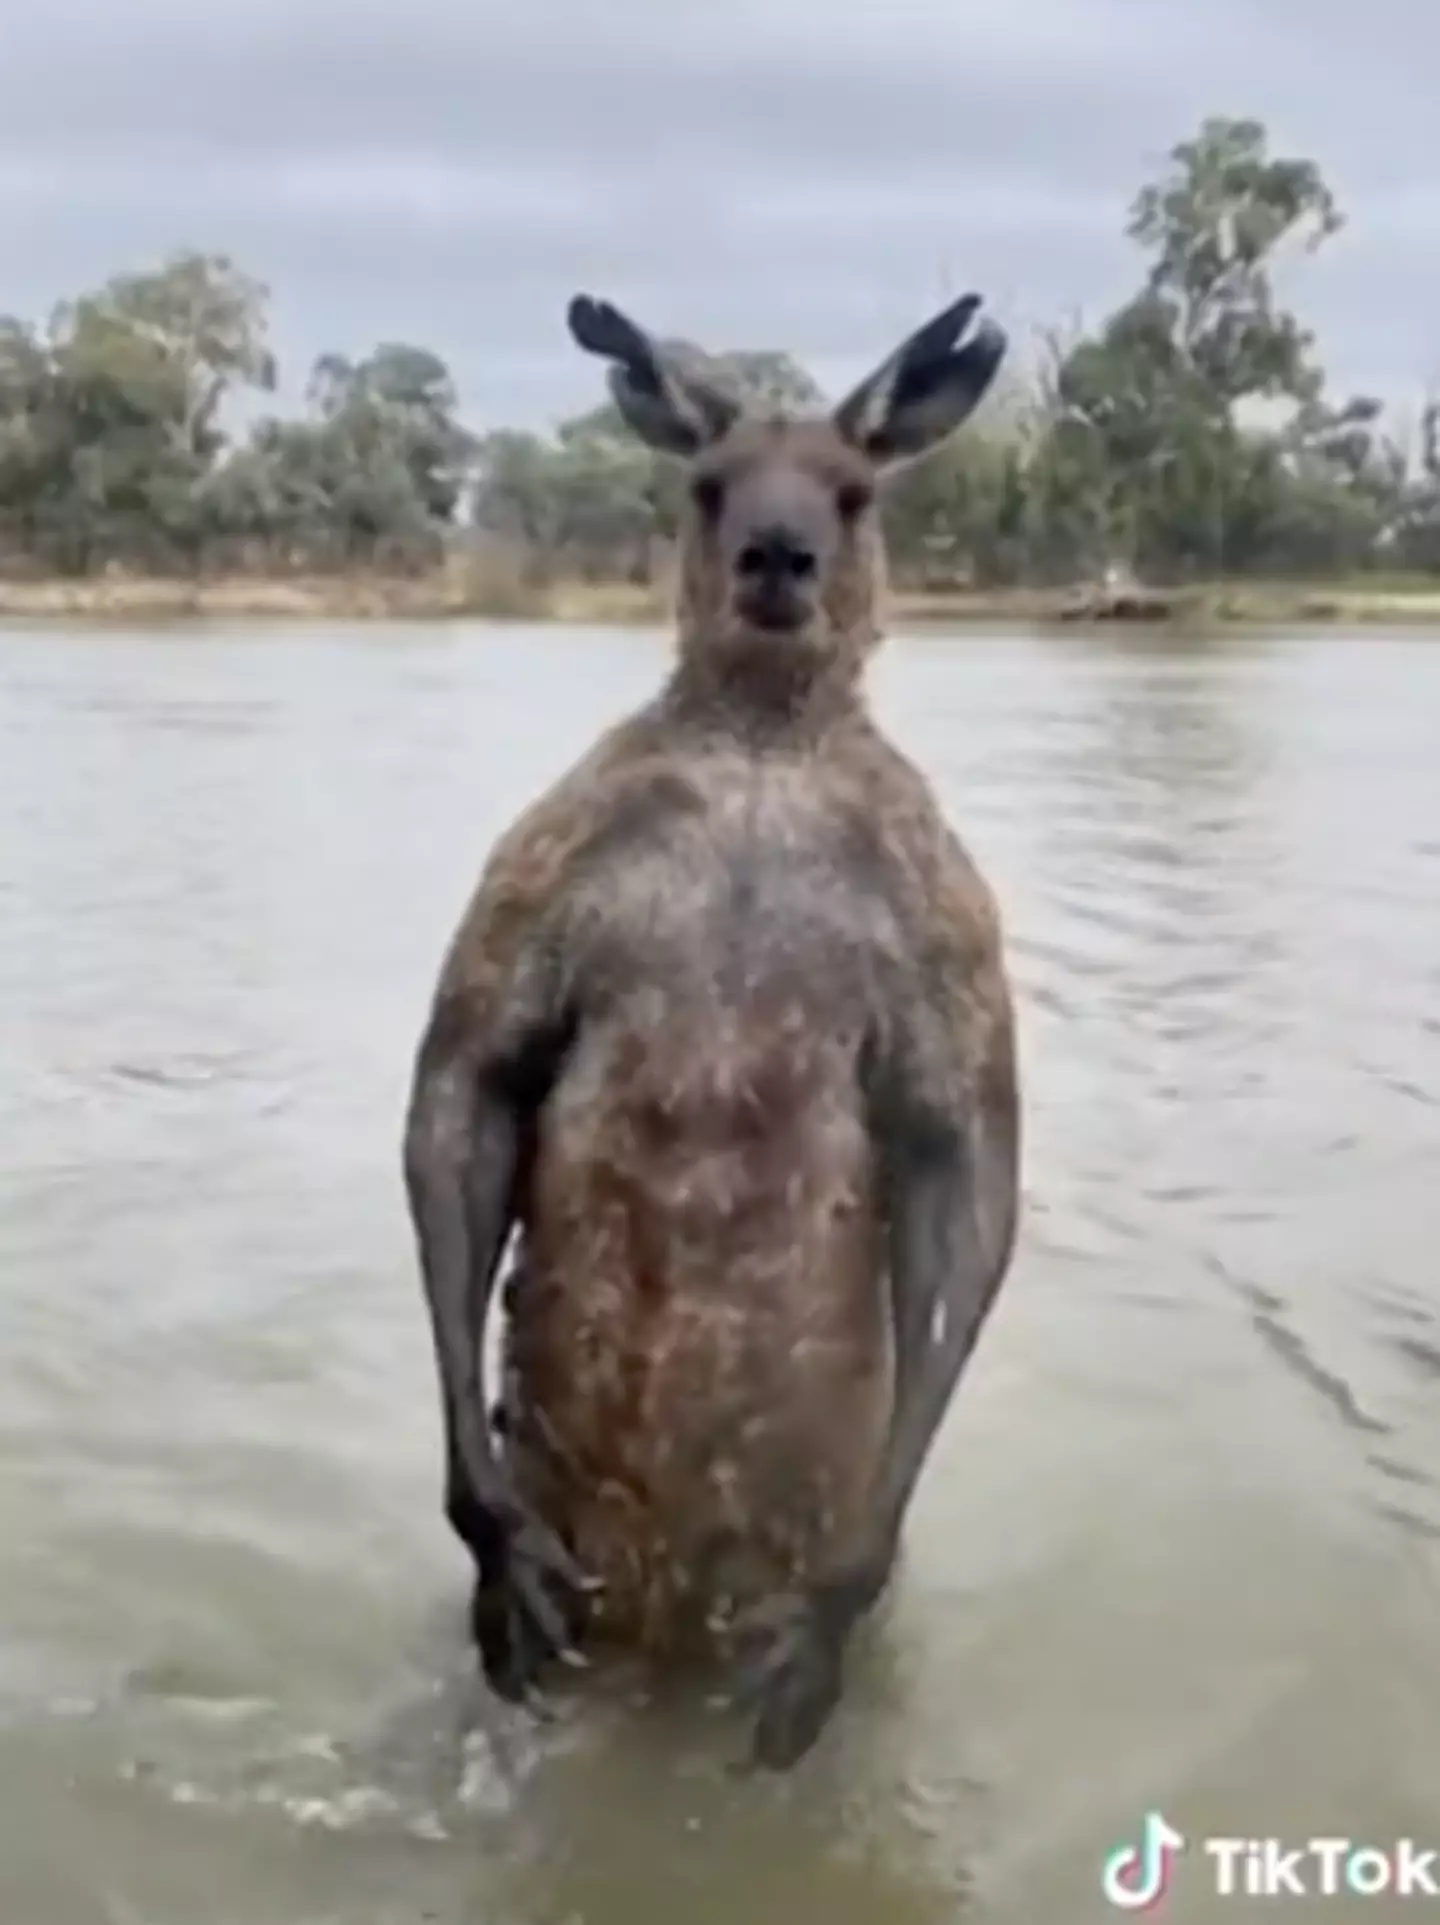 The kangaroo is a whopping two-feet tall.